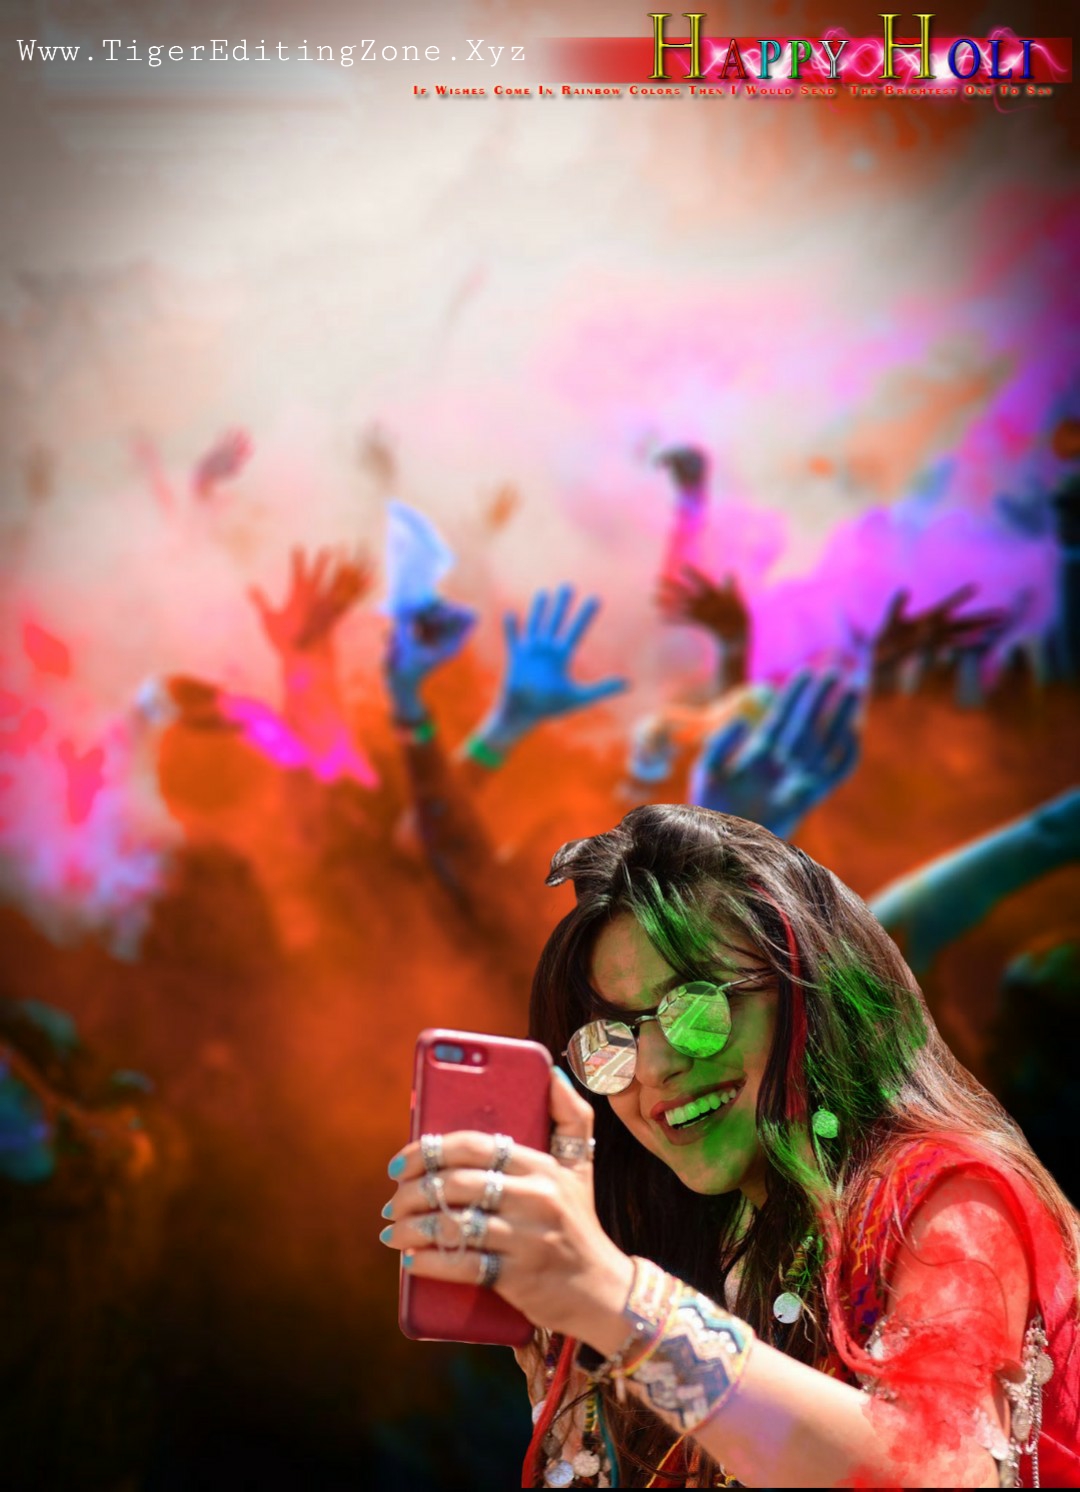 100+ Best Happy Holi Background Images HD for PicsArt | Happy Holi Photo Editing Background 2021